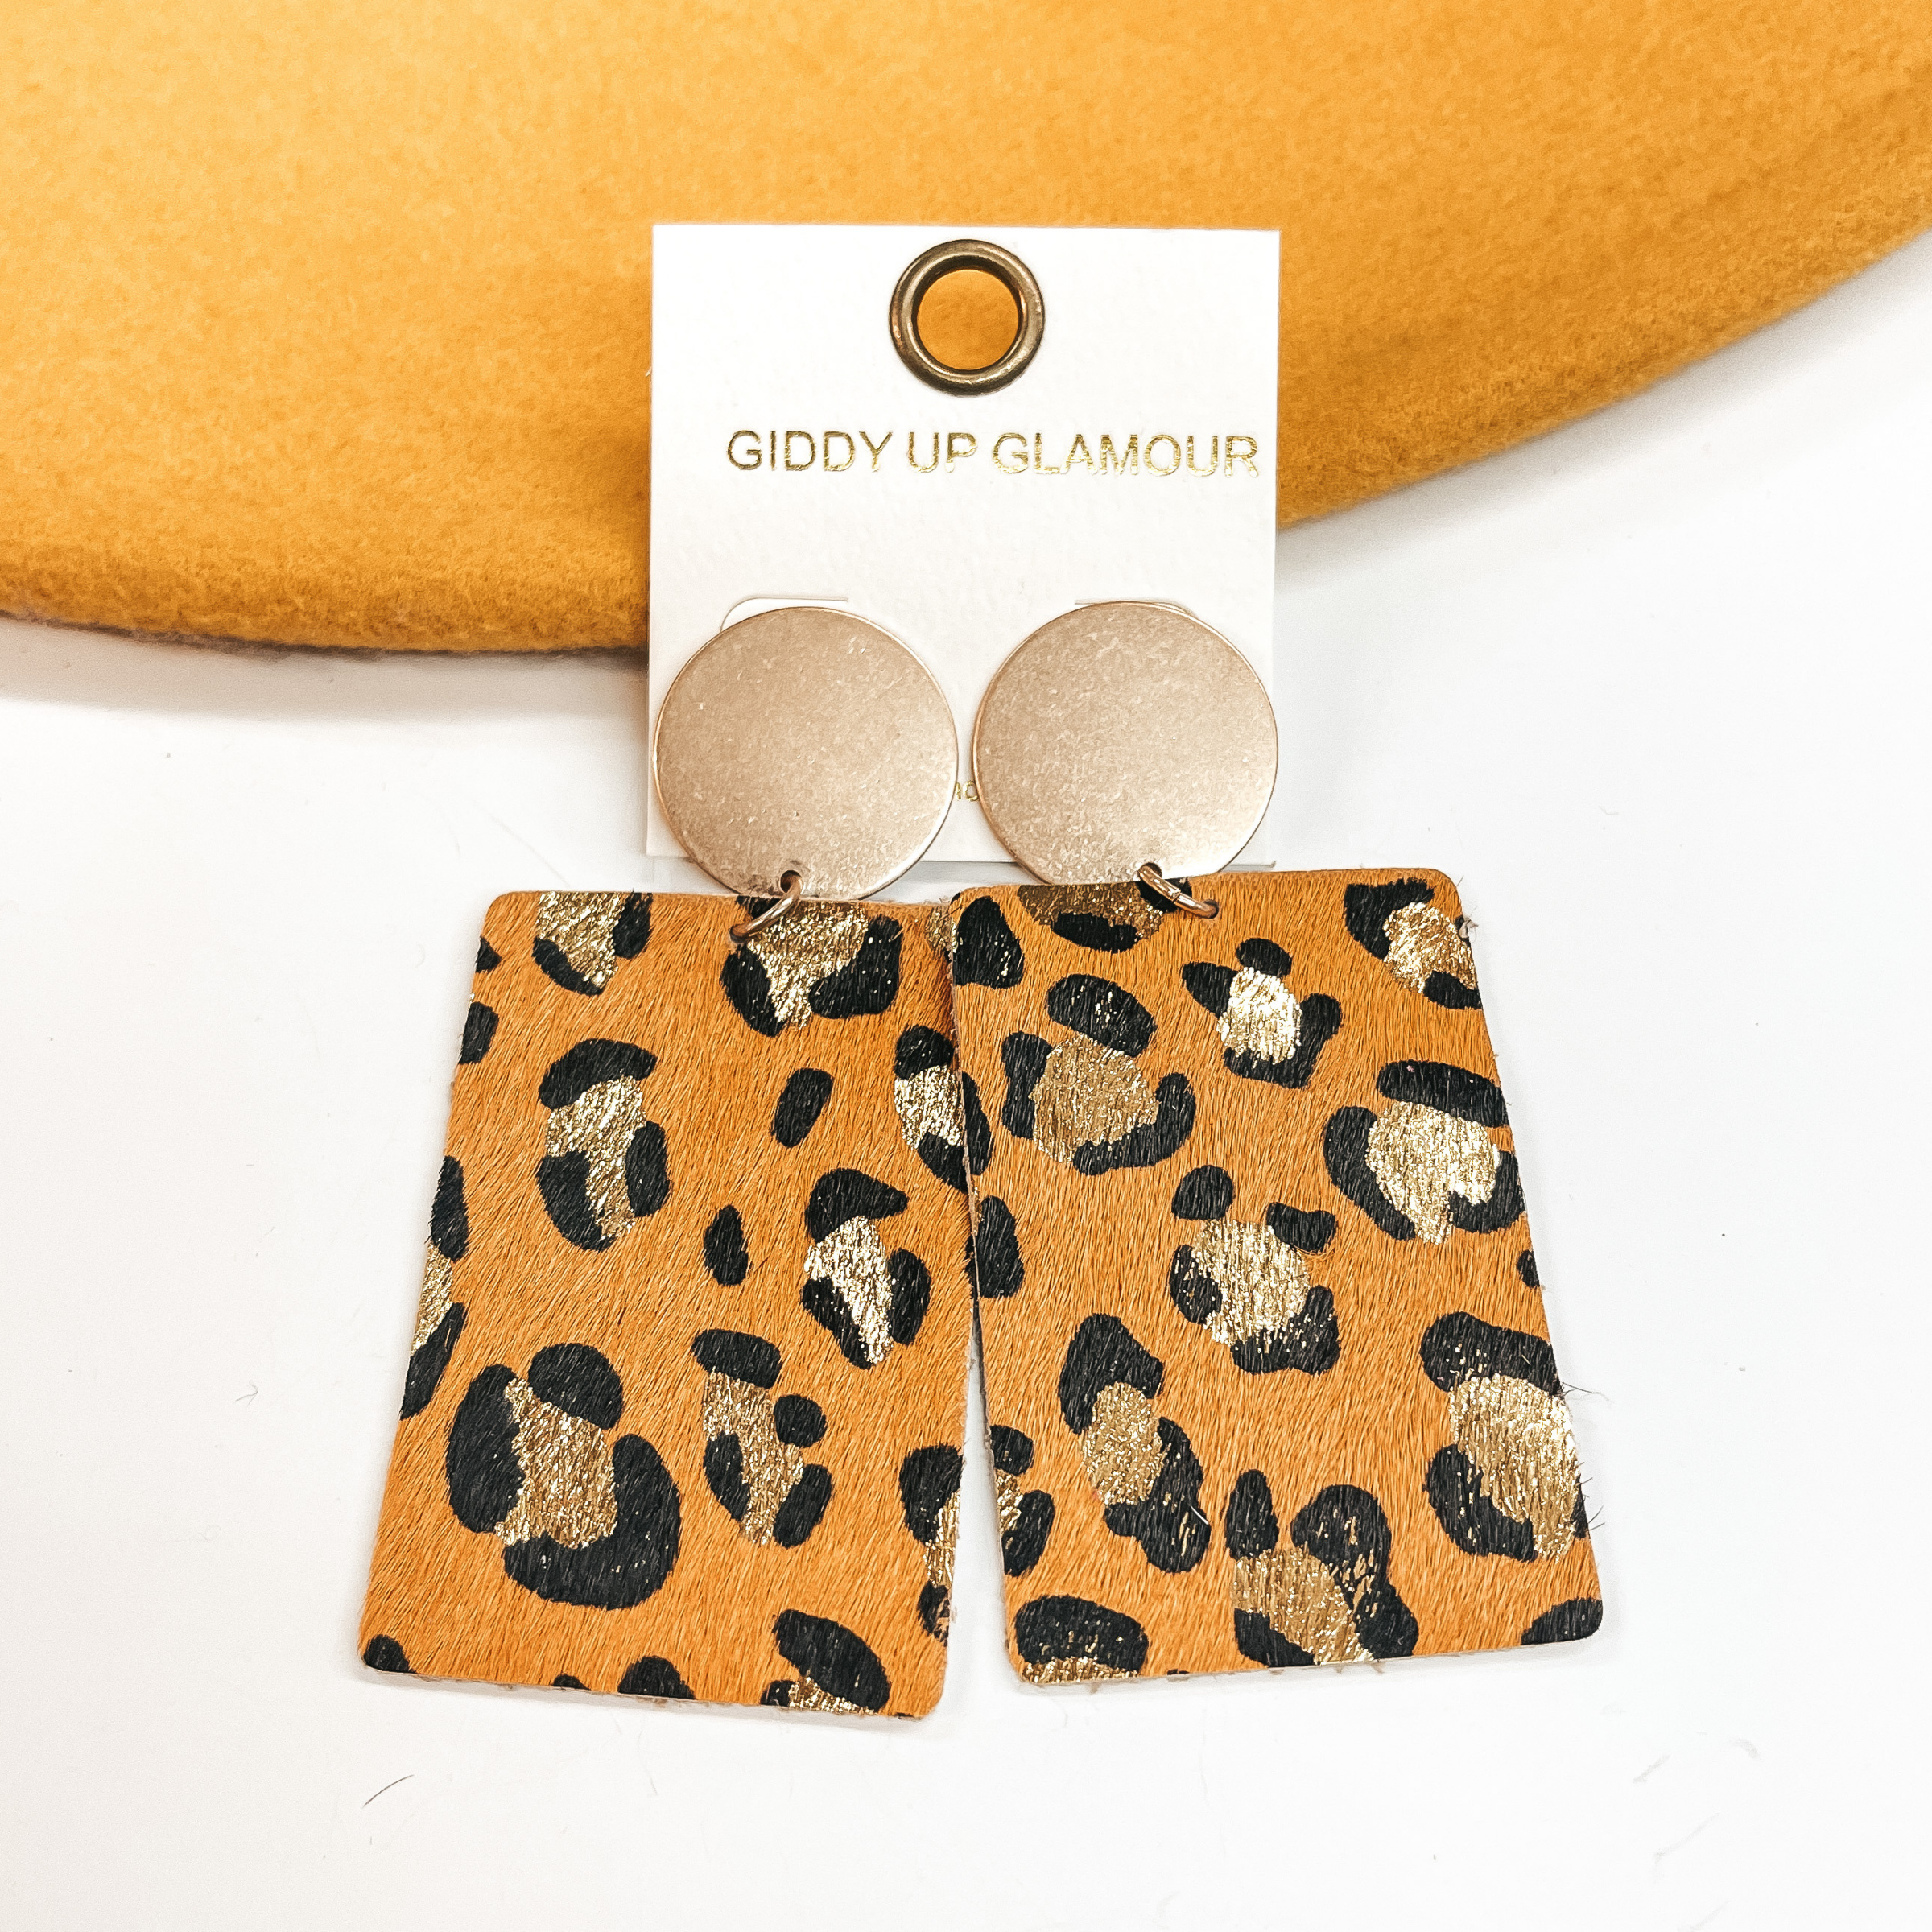 Gold circle stud earrings with black and gold leopard print on yellow leather hide.  Taken on a white background and  leaned up against a yellow hat.